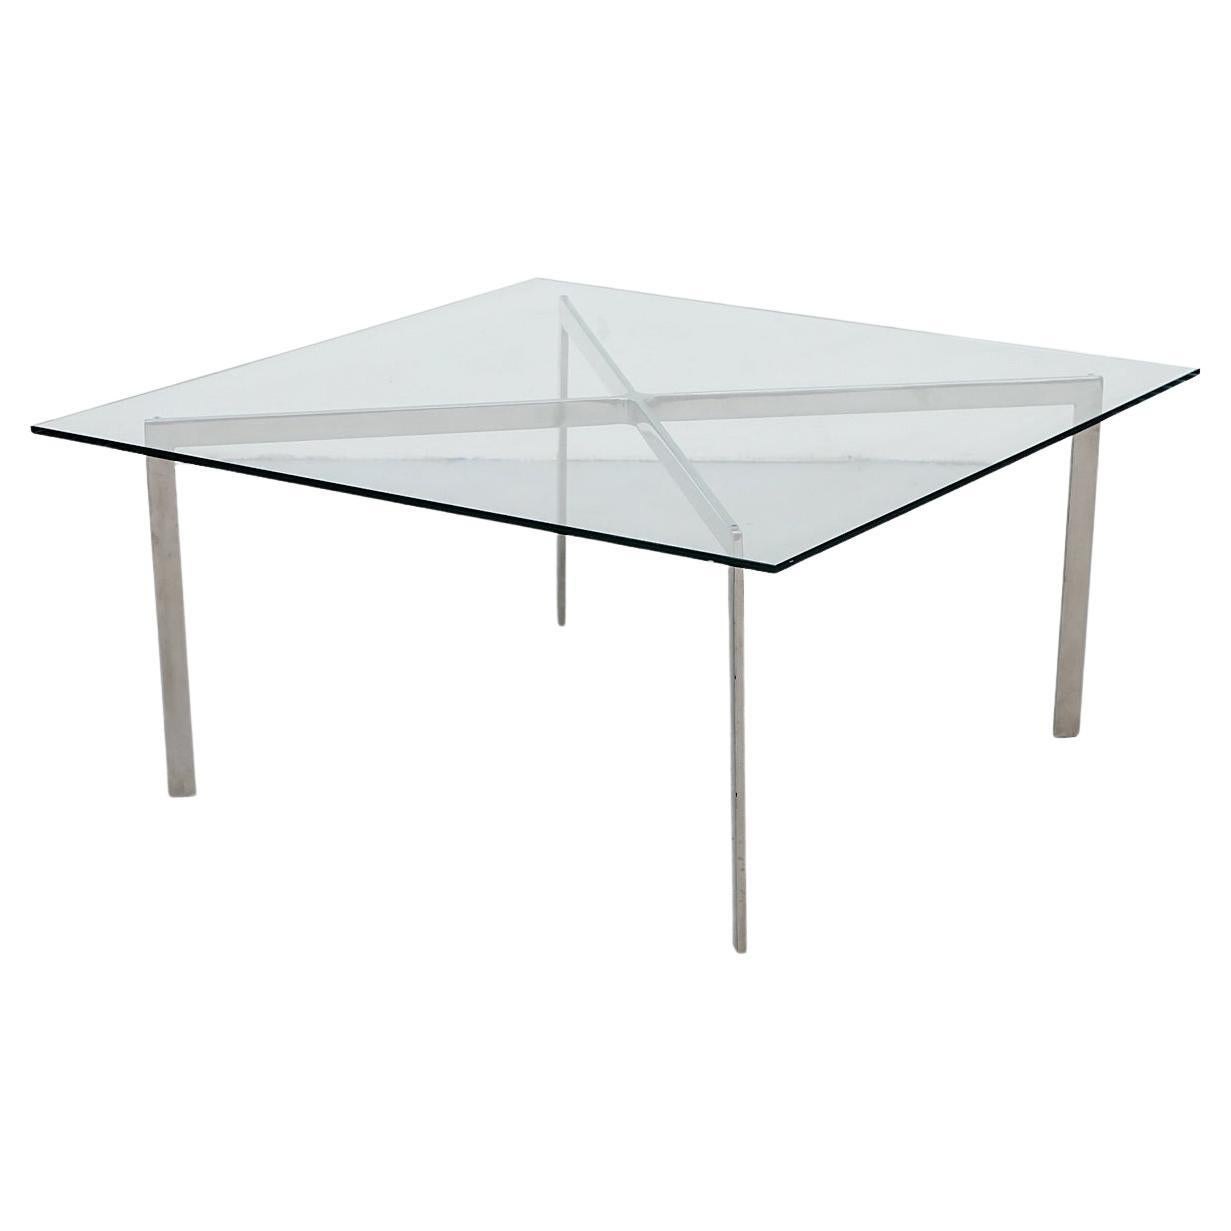 Ludwig Mies van der Rohe Attributed "Barcelona" Coffee Table